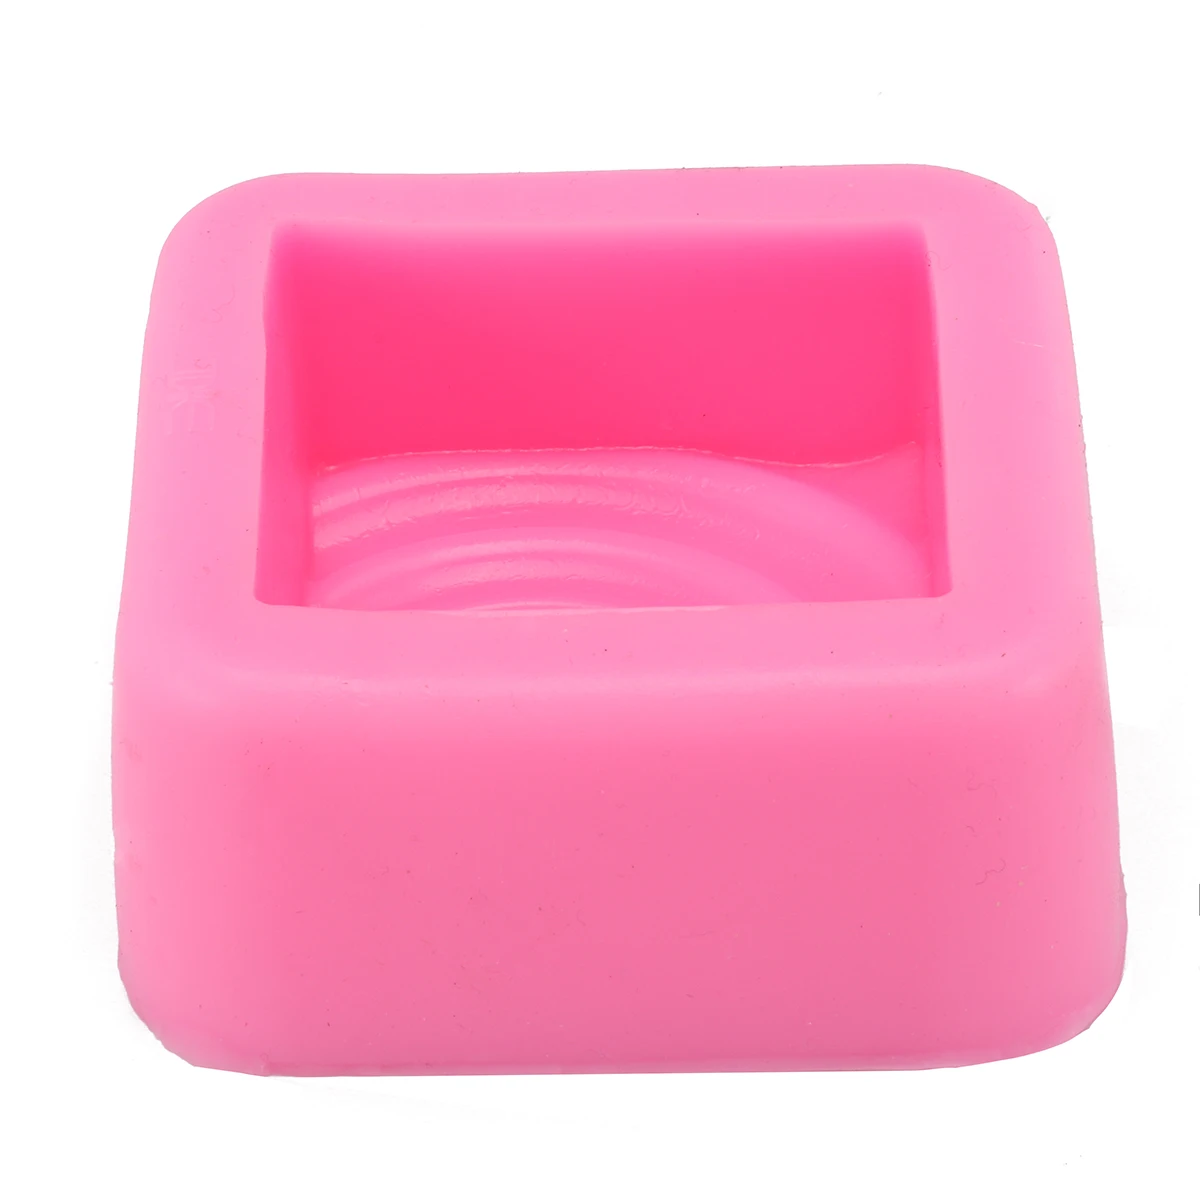 1pc 3D Square Shape Design Hand Made DIY Silicone Mold Soap Candle Muffin Baking Leaf Shaped Molds Fondant Cake Decorating Tools